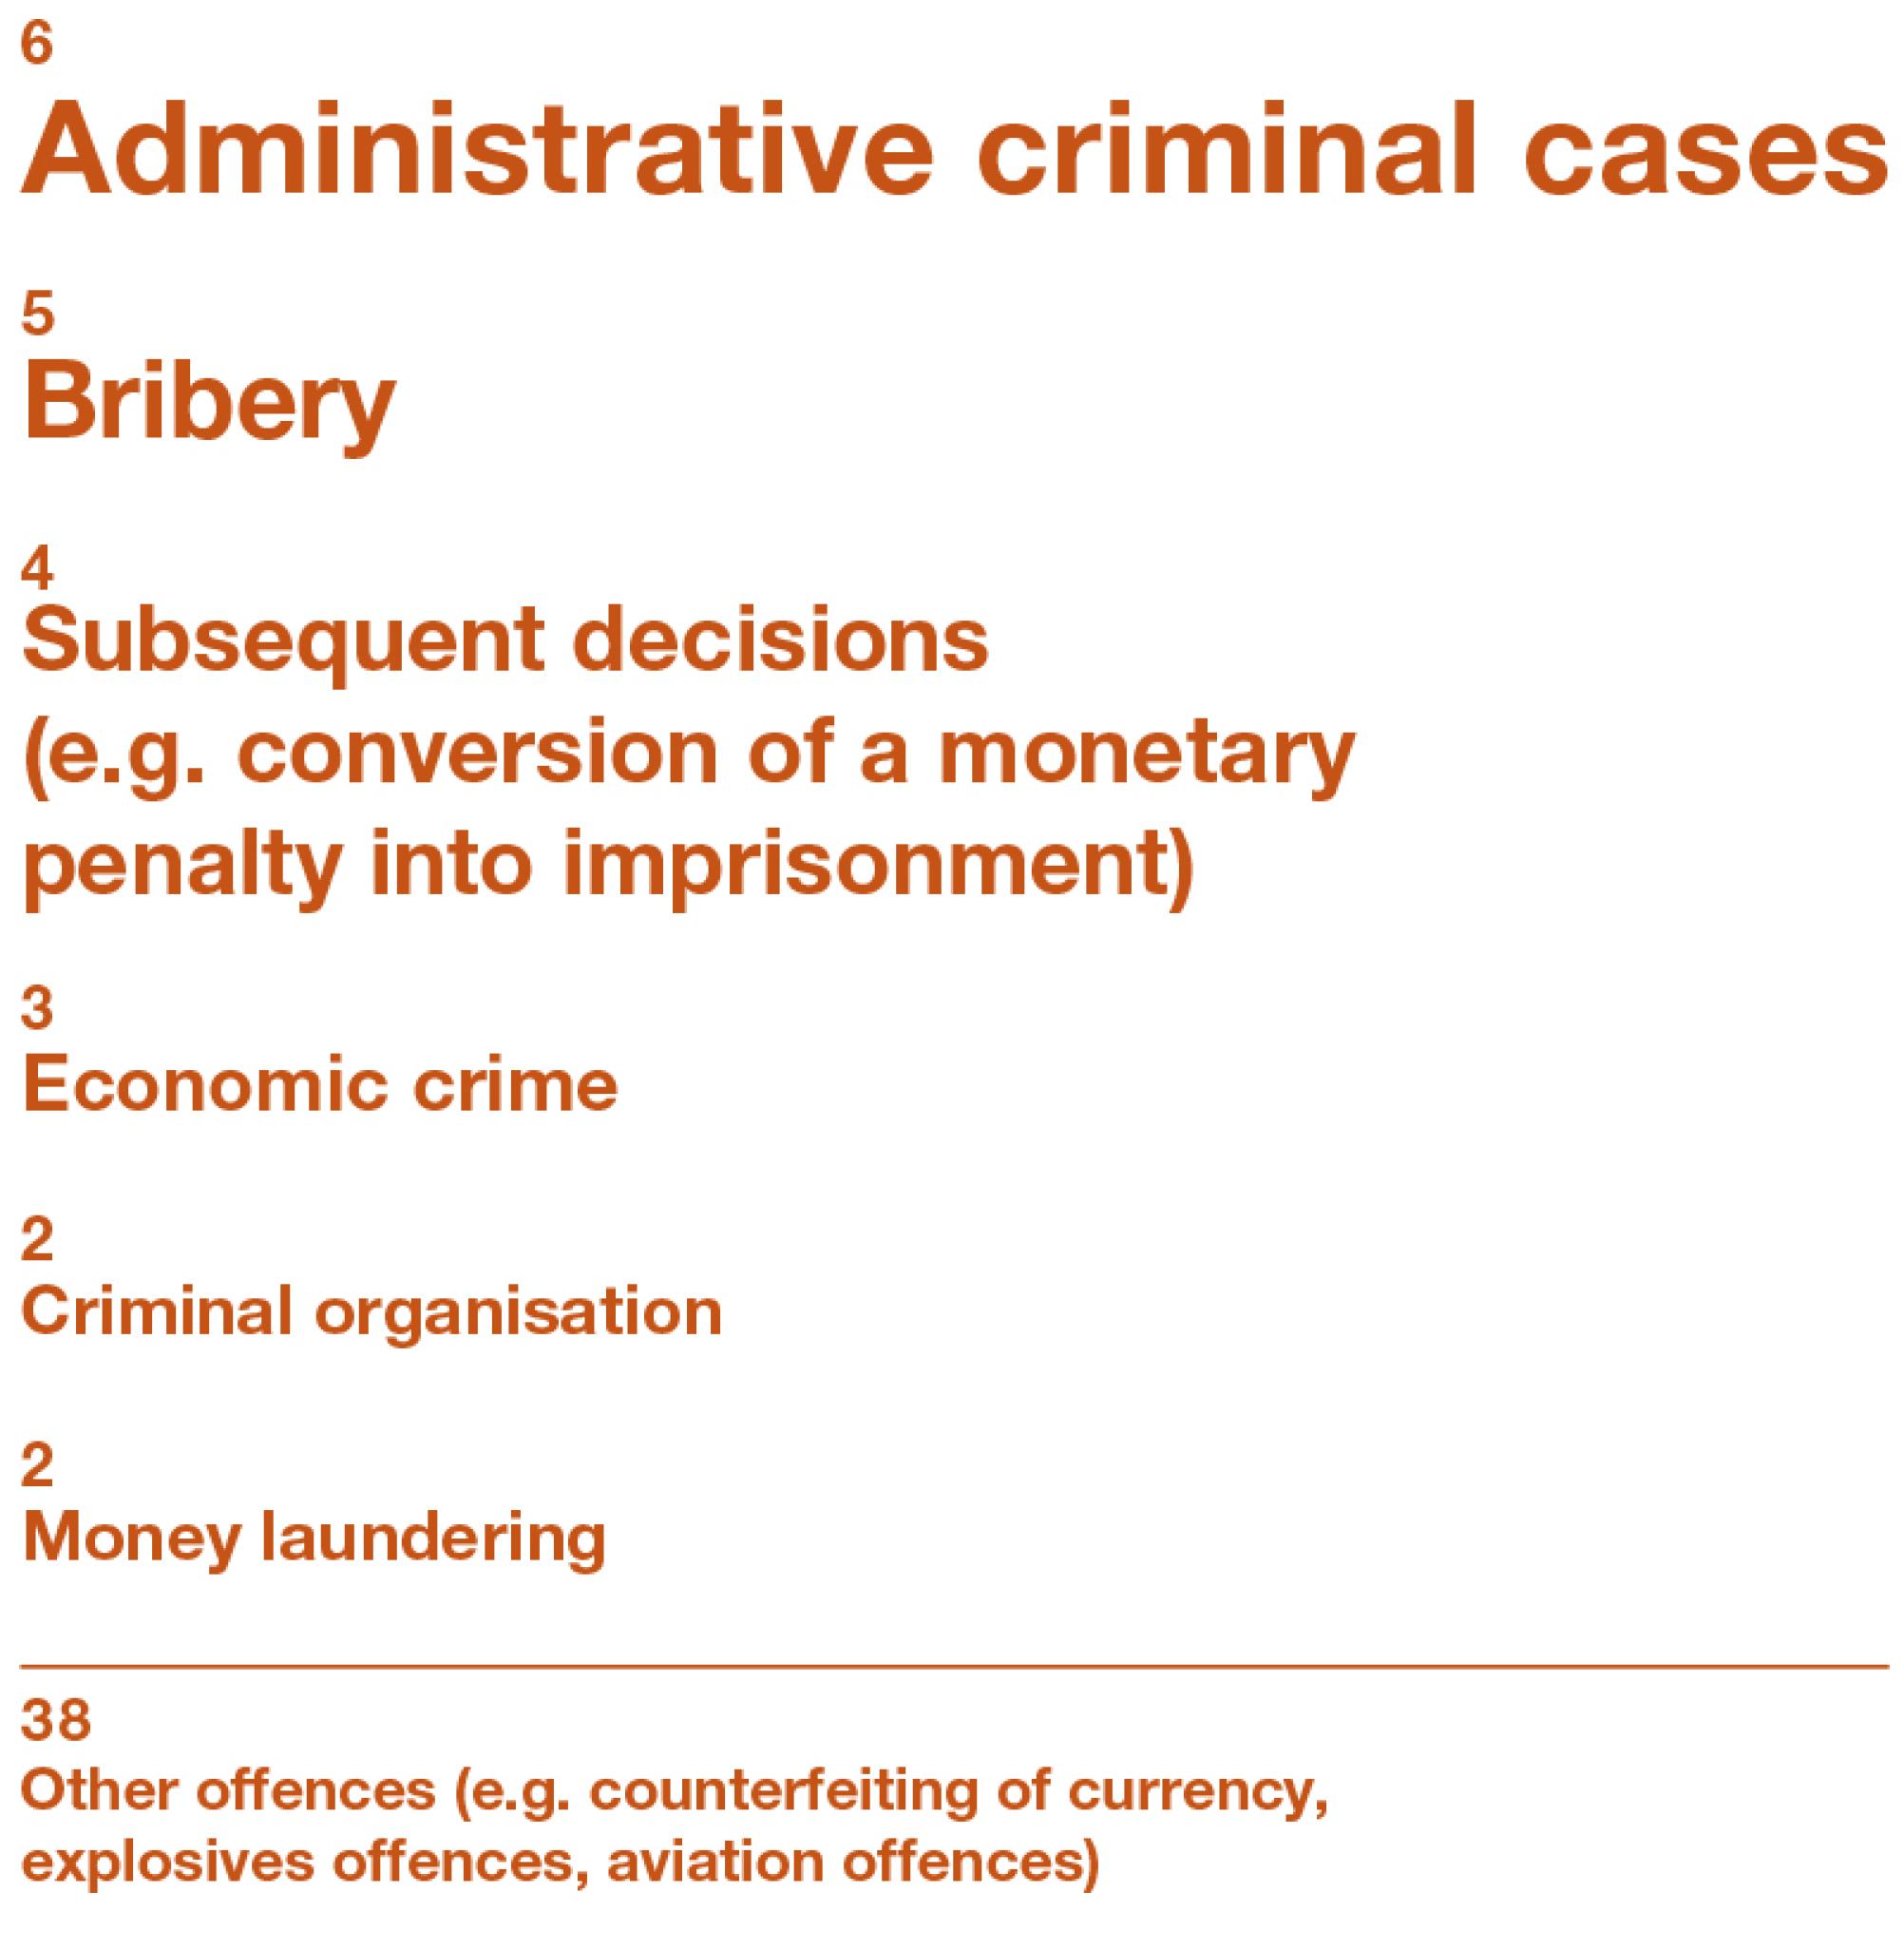 This image shows a breakdown by subject matter of the approximately 60 cases heard by the Criminal Chamber of the Federal Criminal Court in 2021. These include cases involving criminal organisations, money laundering and administrative infractions.